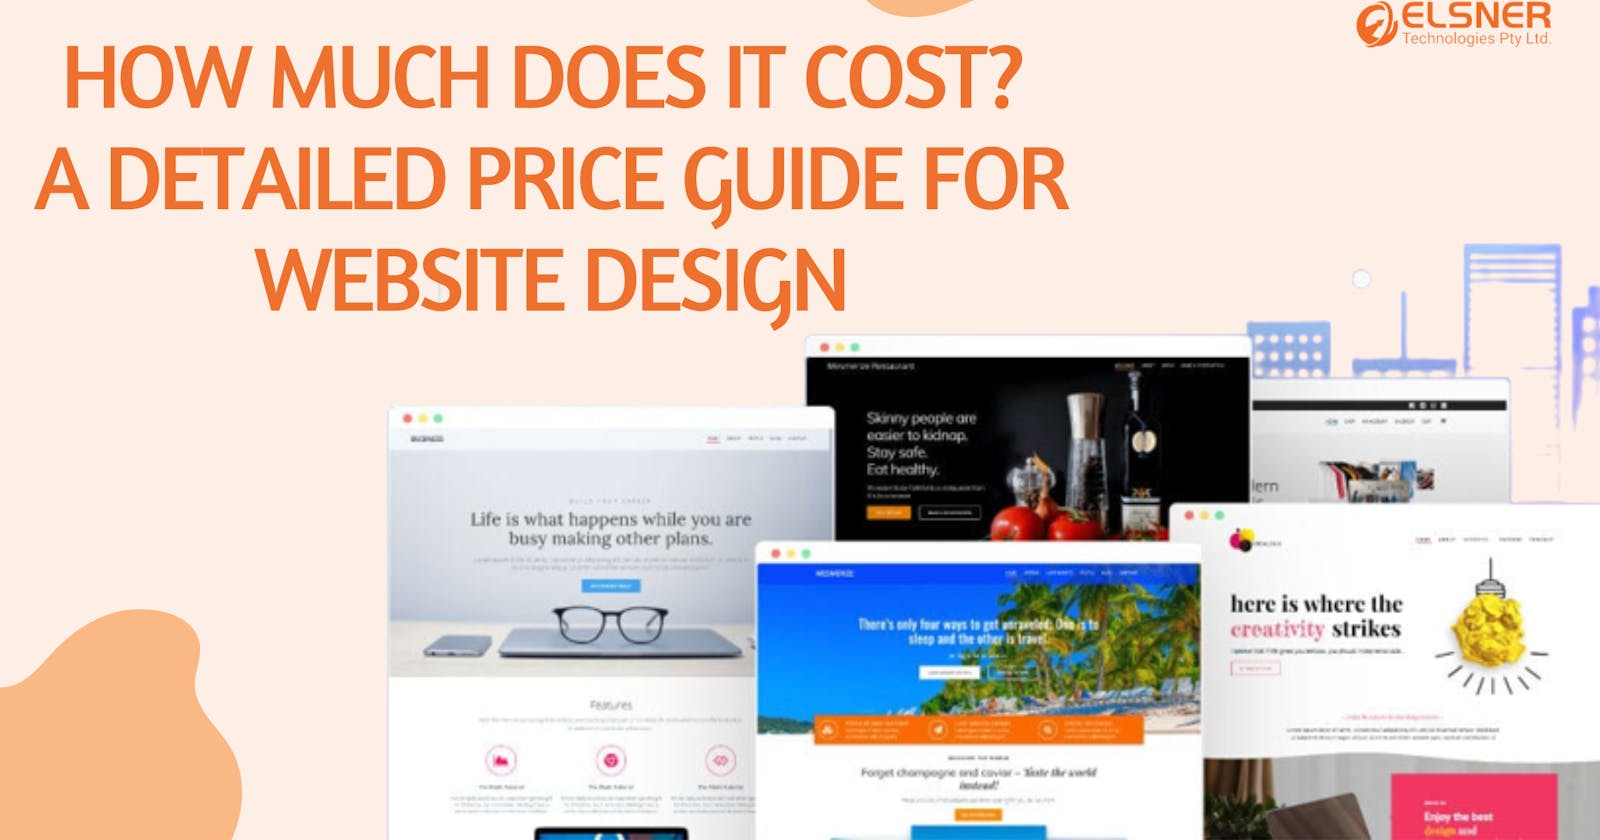 How much does it cost? A detailed price guide for website design.